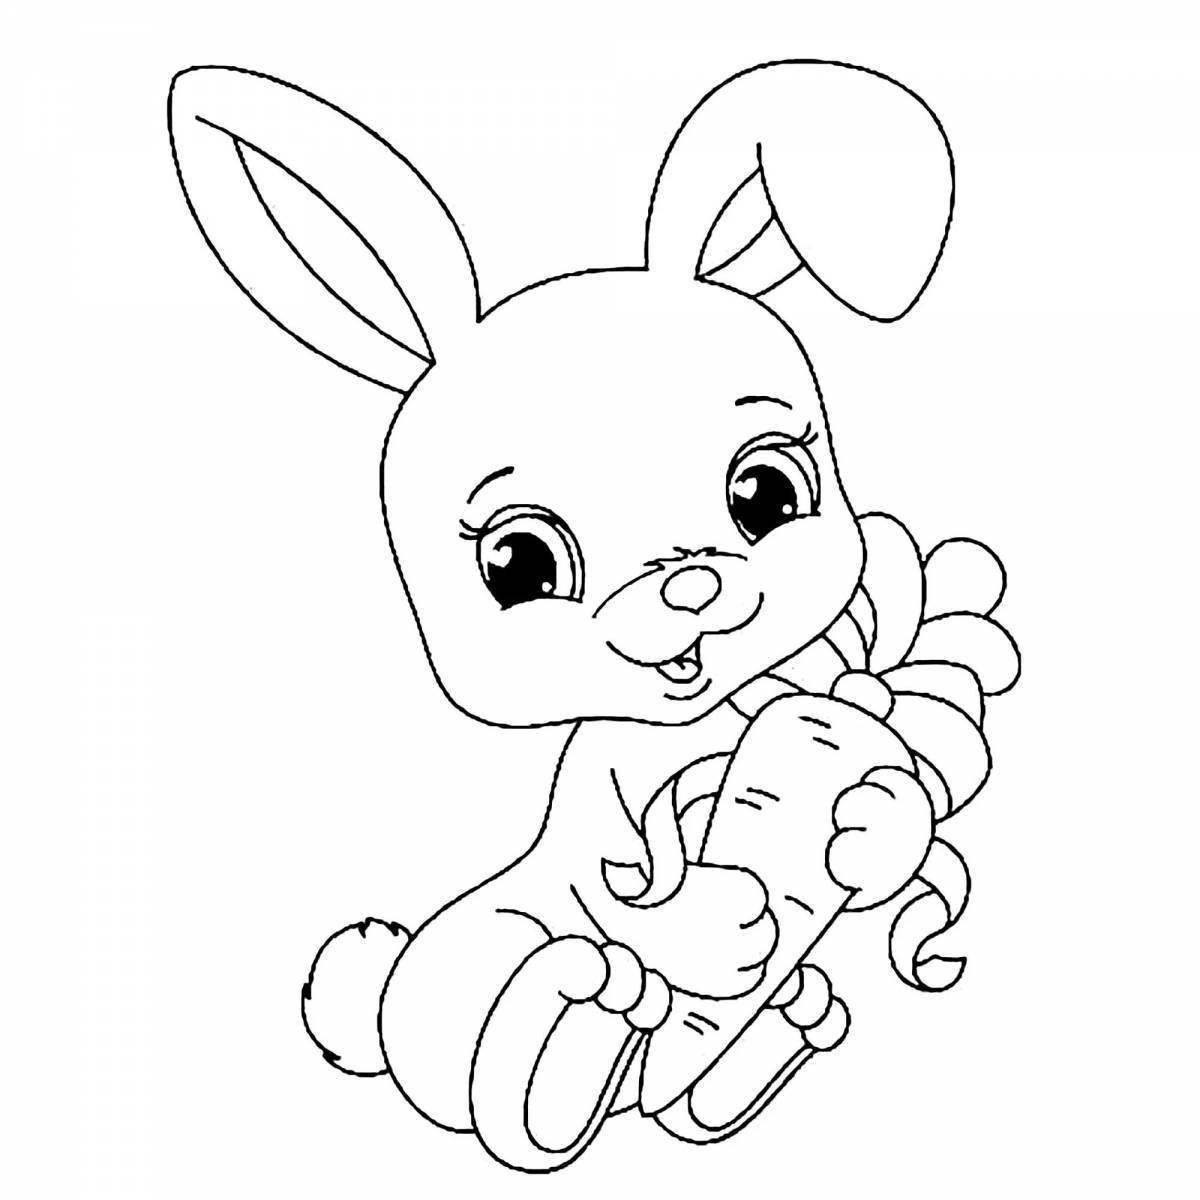 Colorful bunny drawing for kids